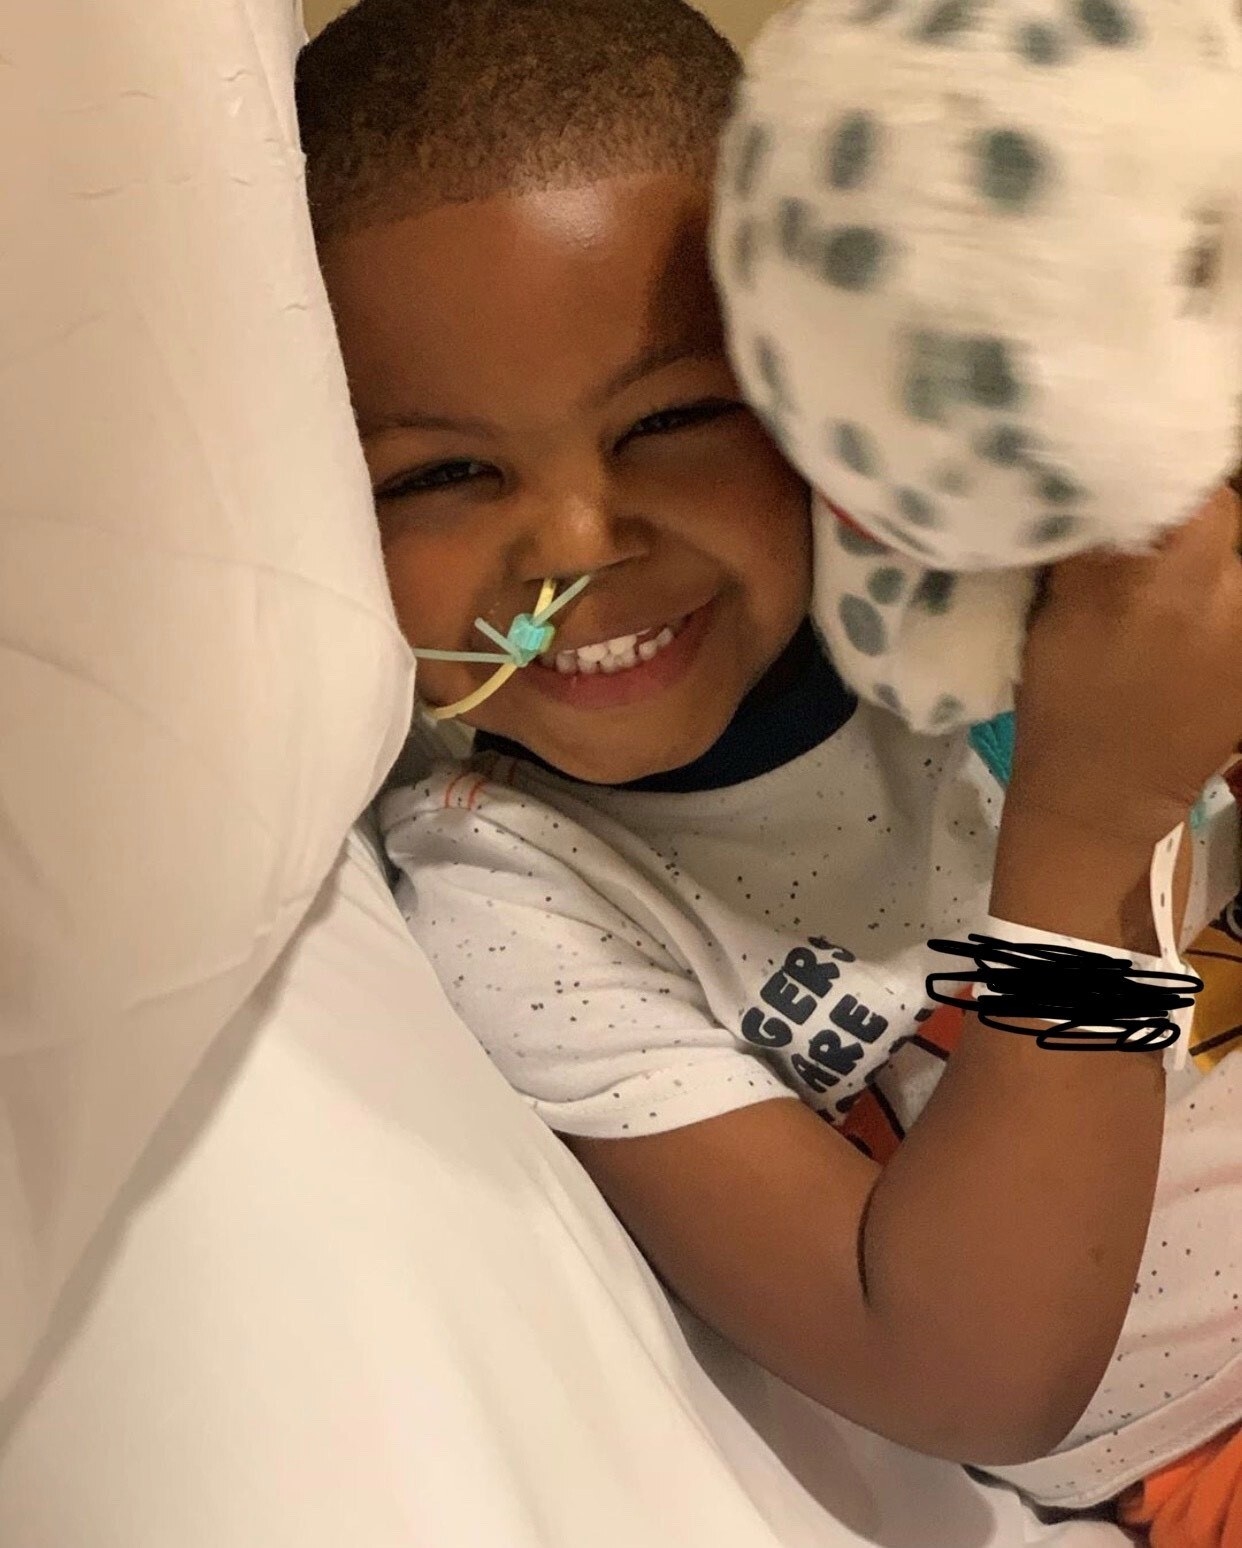 A young boy laughs while lying in a hospital bed, holding a stuffed animal 